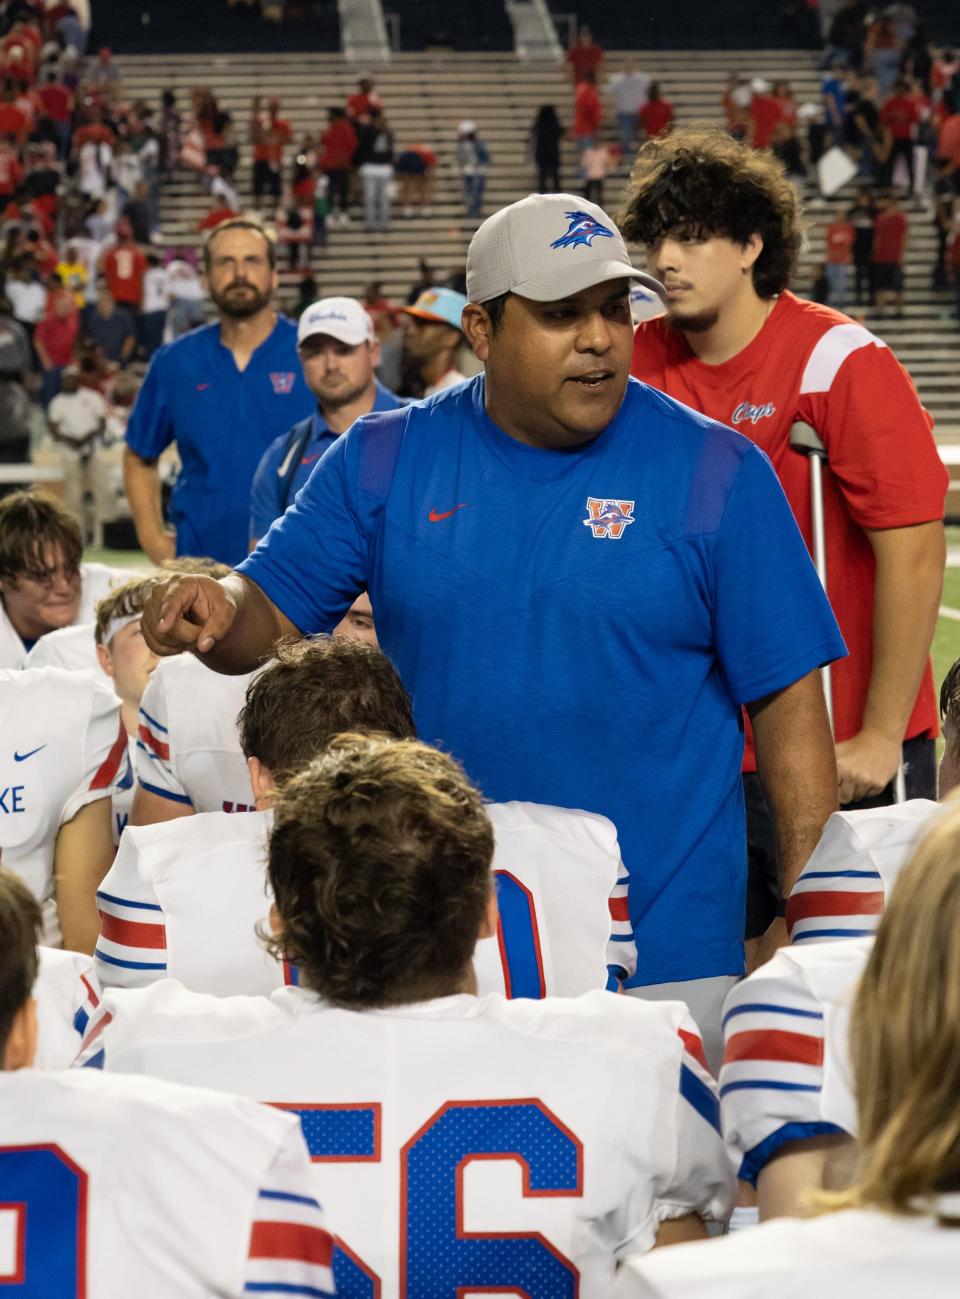 Westlake coach Tony Salazar tells his team that "you are champions" after the loss.